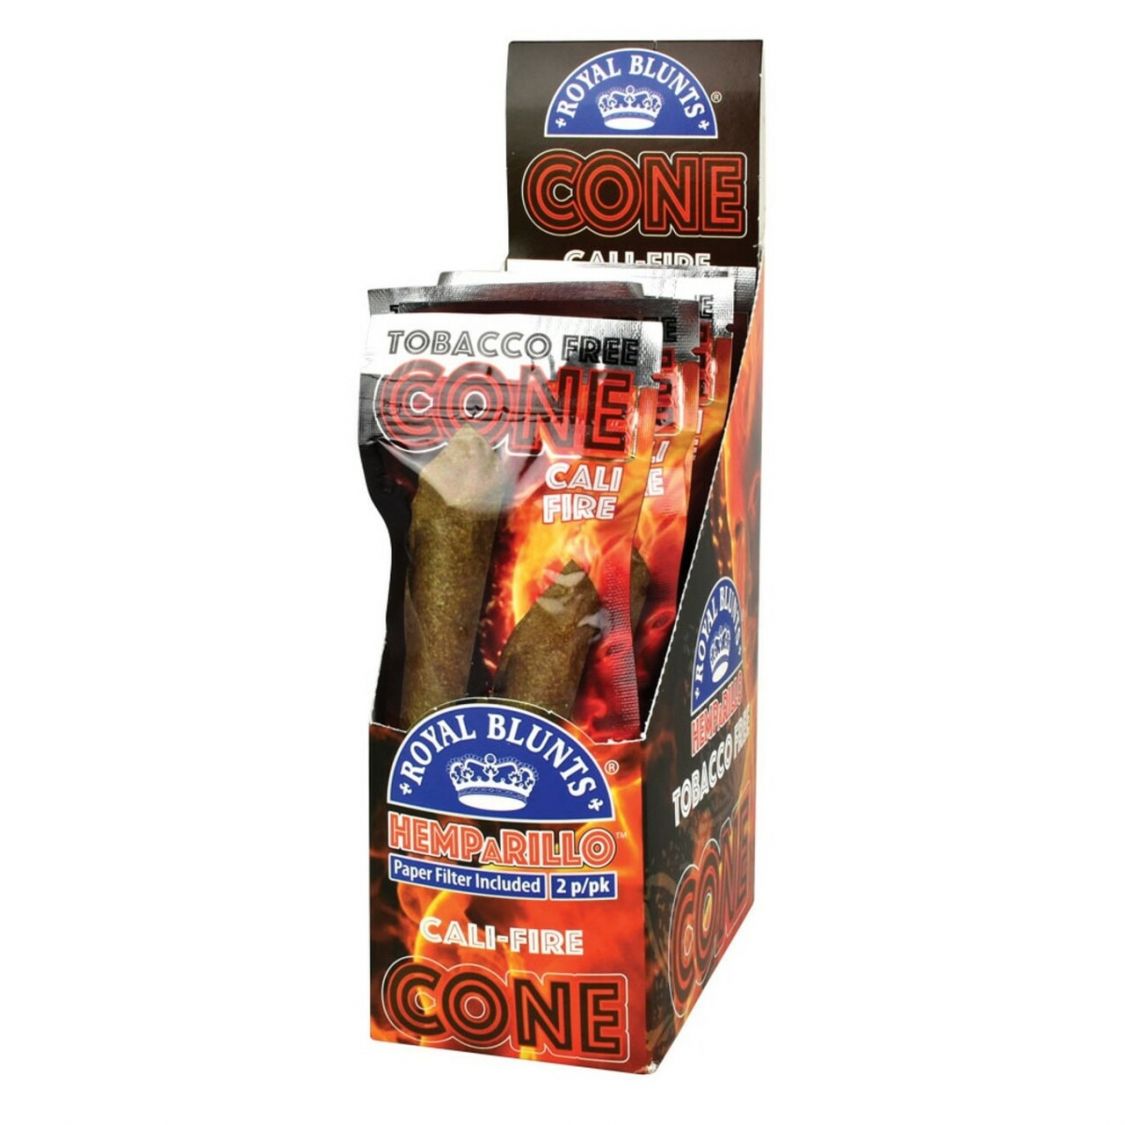  ROYAL BLUNTS - TOBACCO FREE- CAIL FIRE Accessories Paper / Rolling Supplies